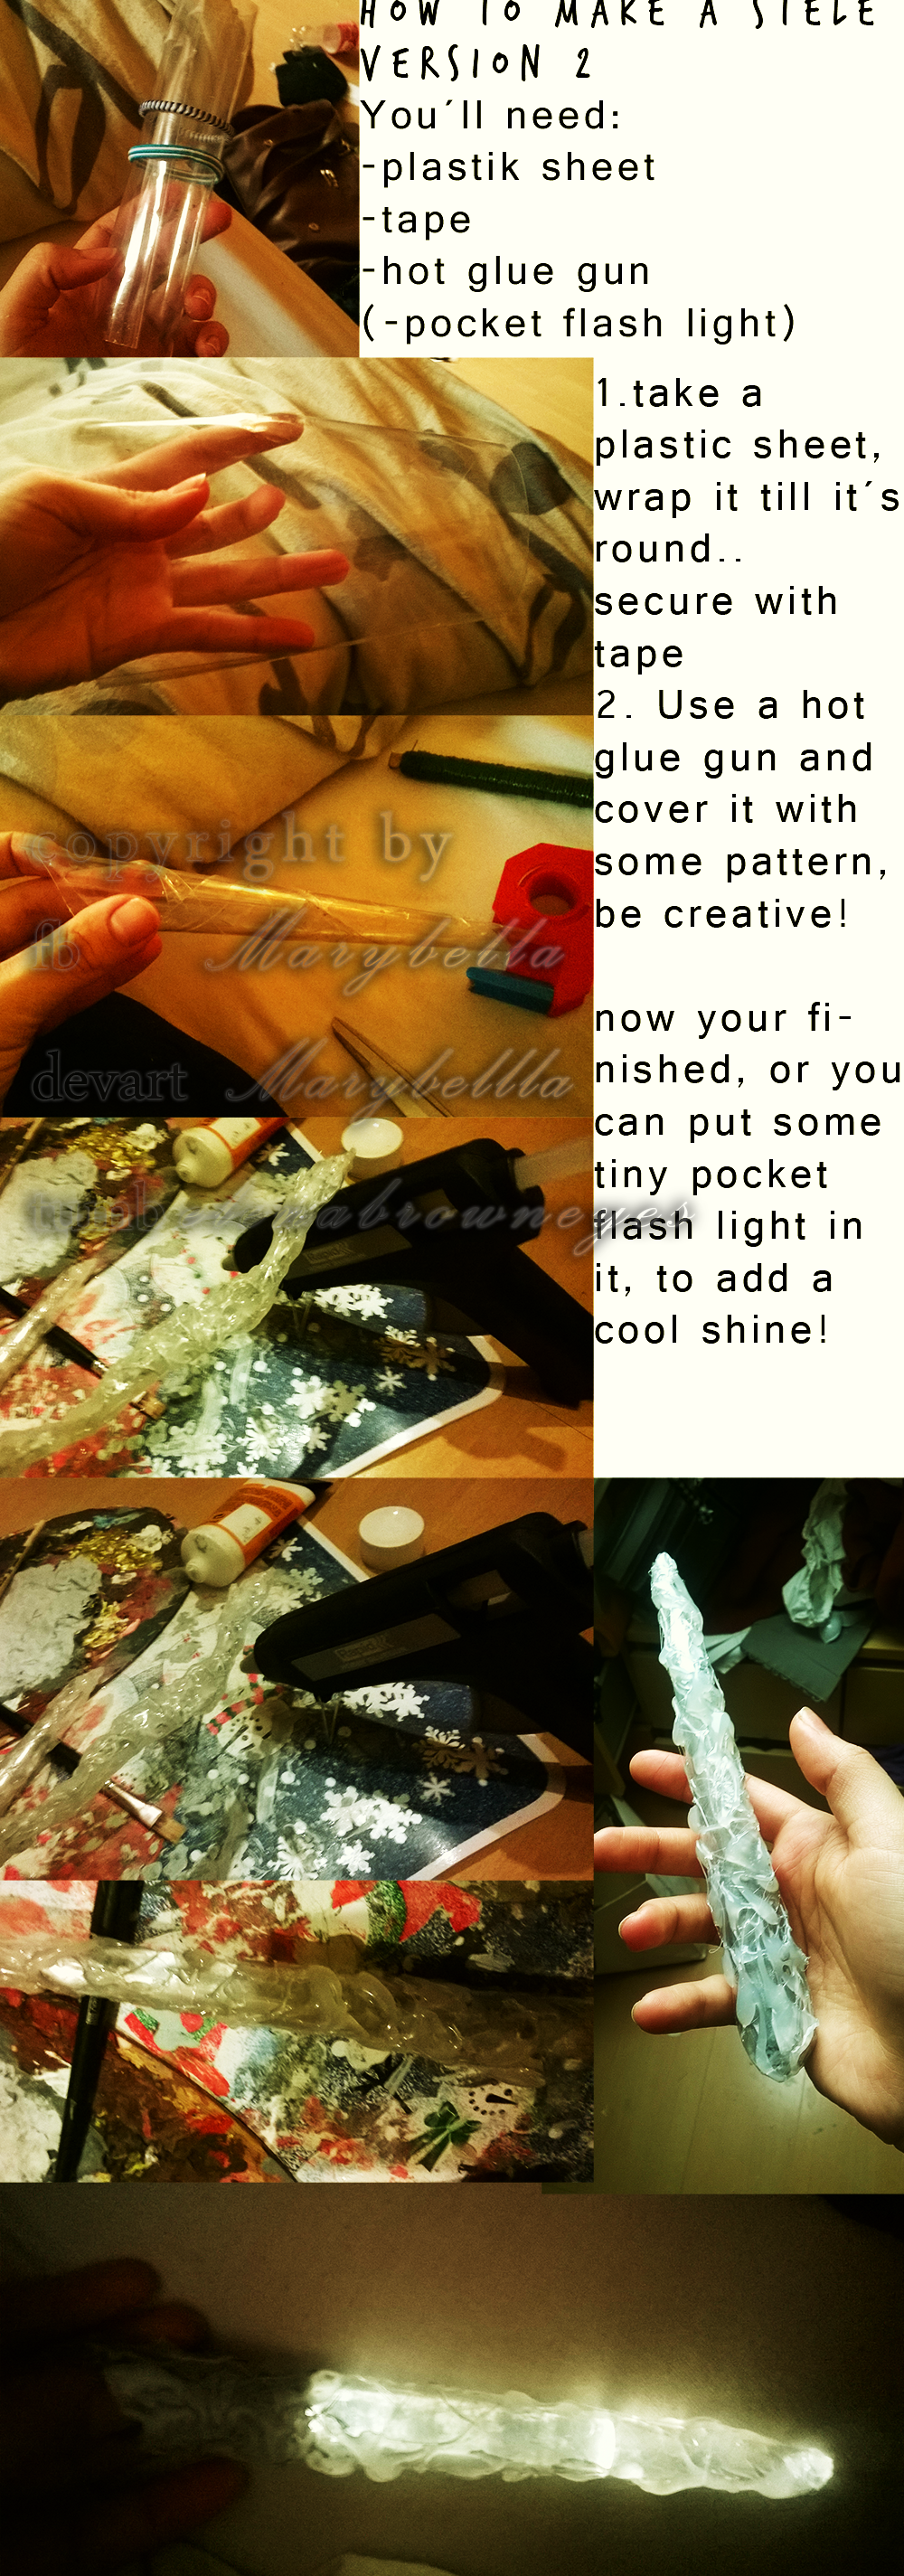 How to make a Shadowhunter Stele version 2